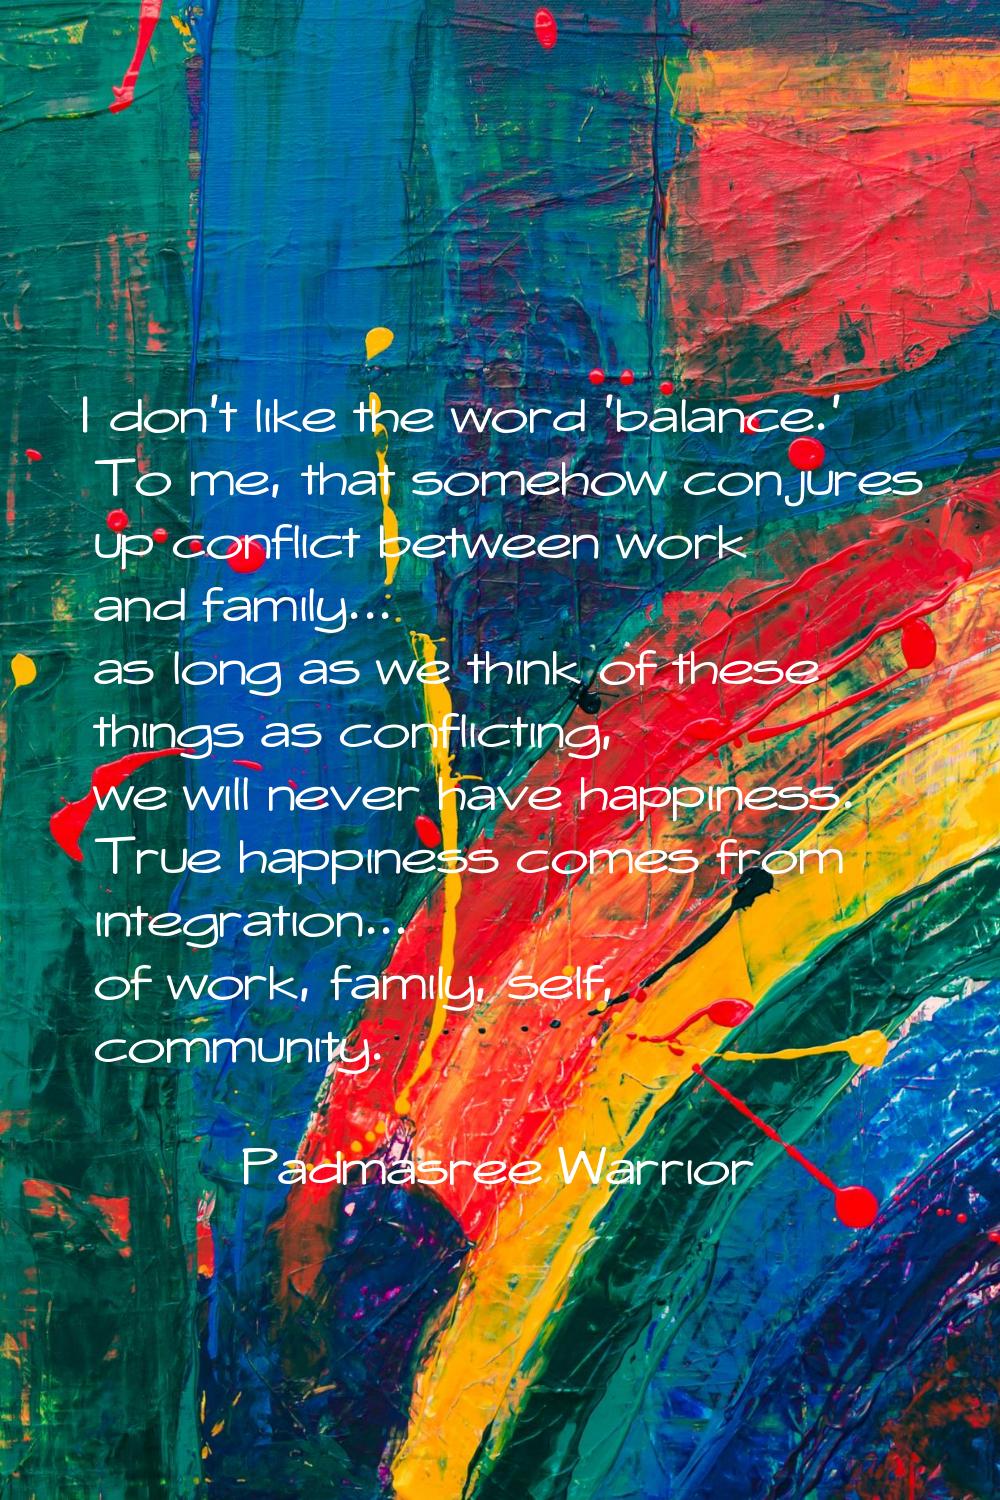 I don't like the word 'balance.' To me, that somehow conjures up conflict between work and family..